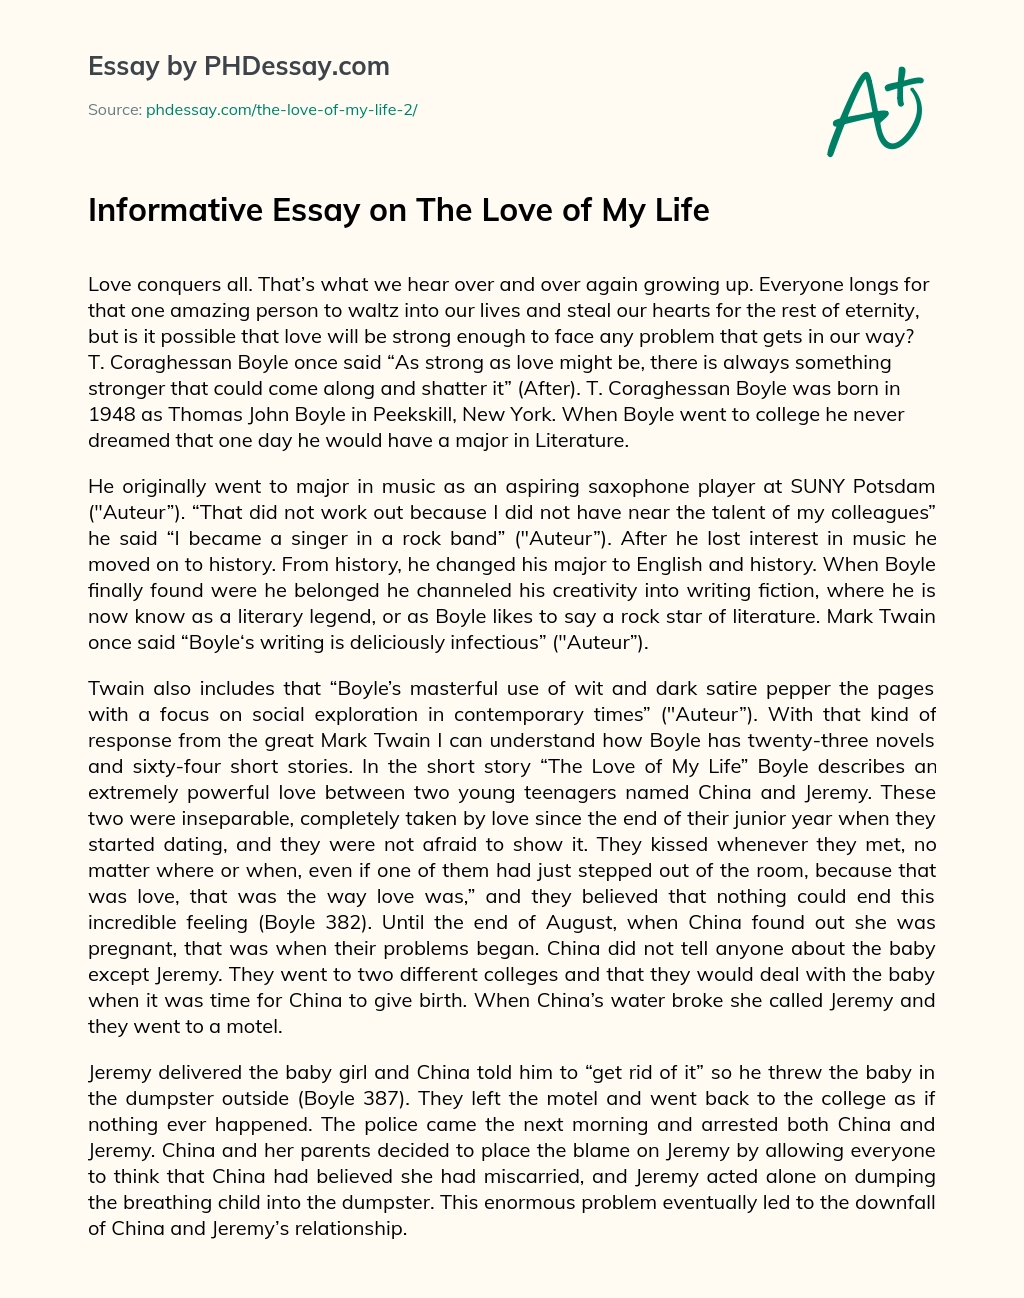 Informative Essay on The Love of My Life essay